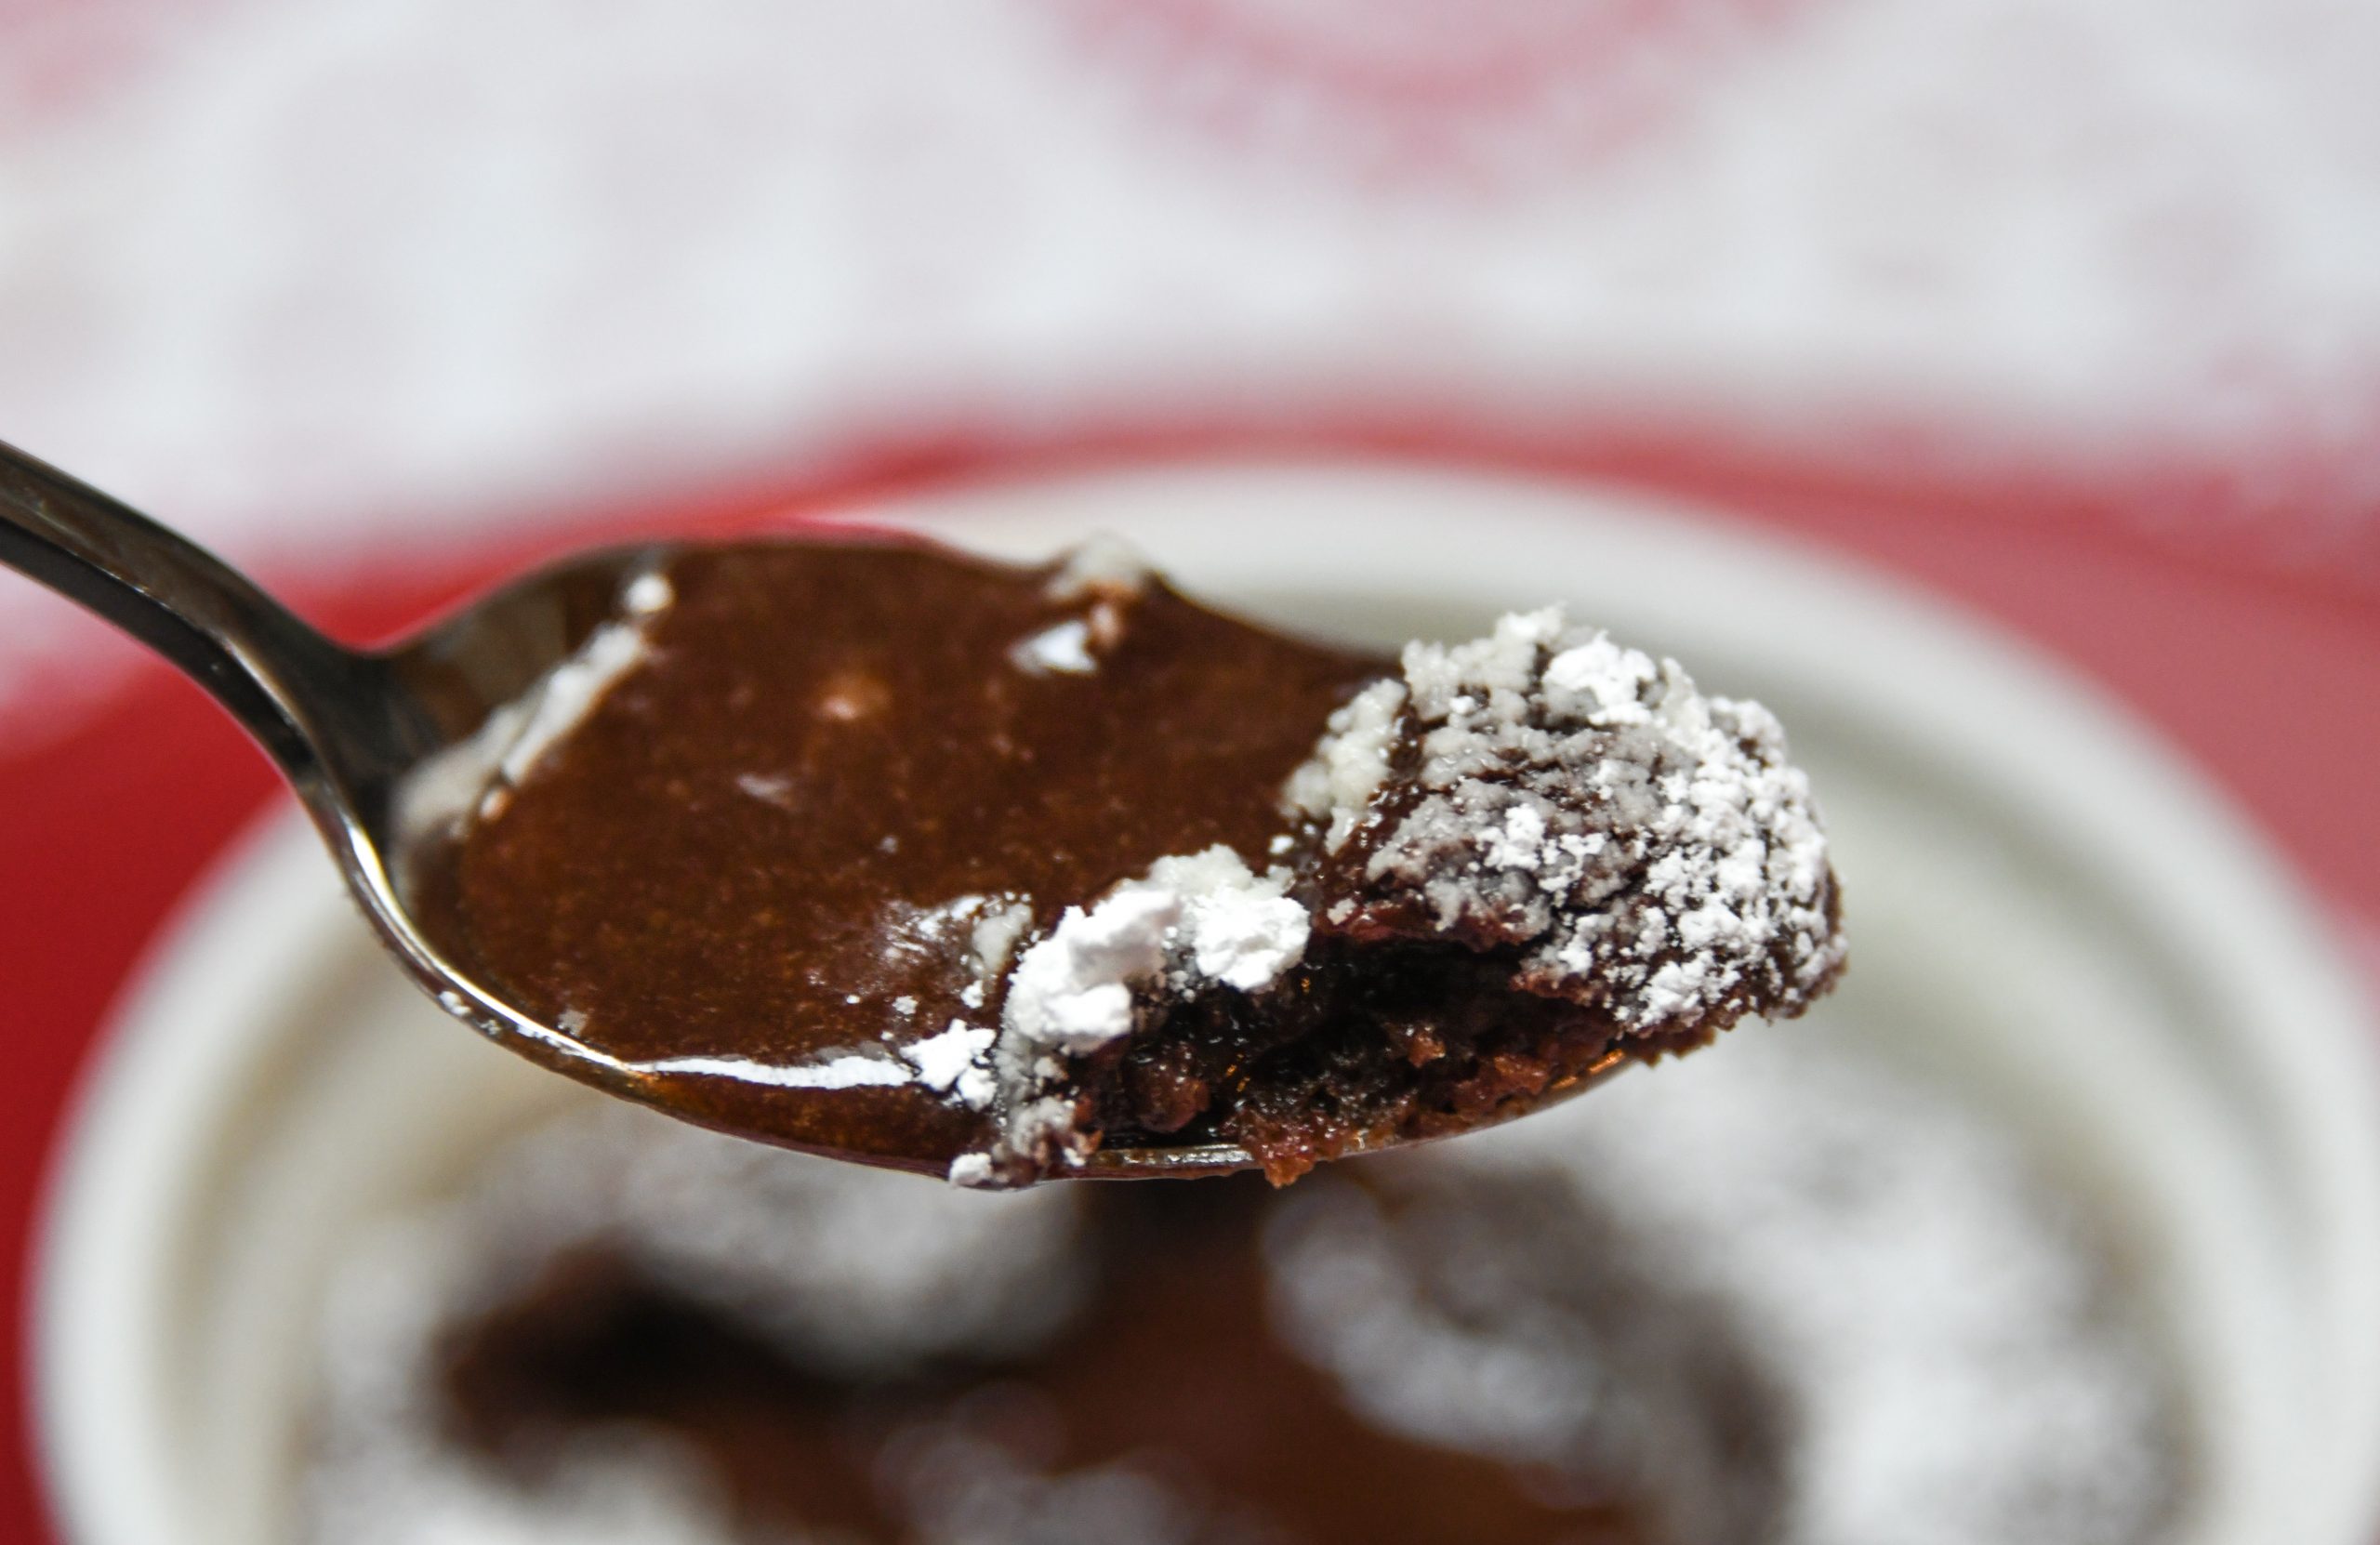 spoonful of baked chocolate pudding